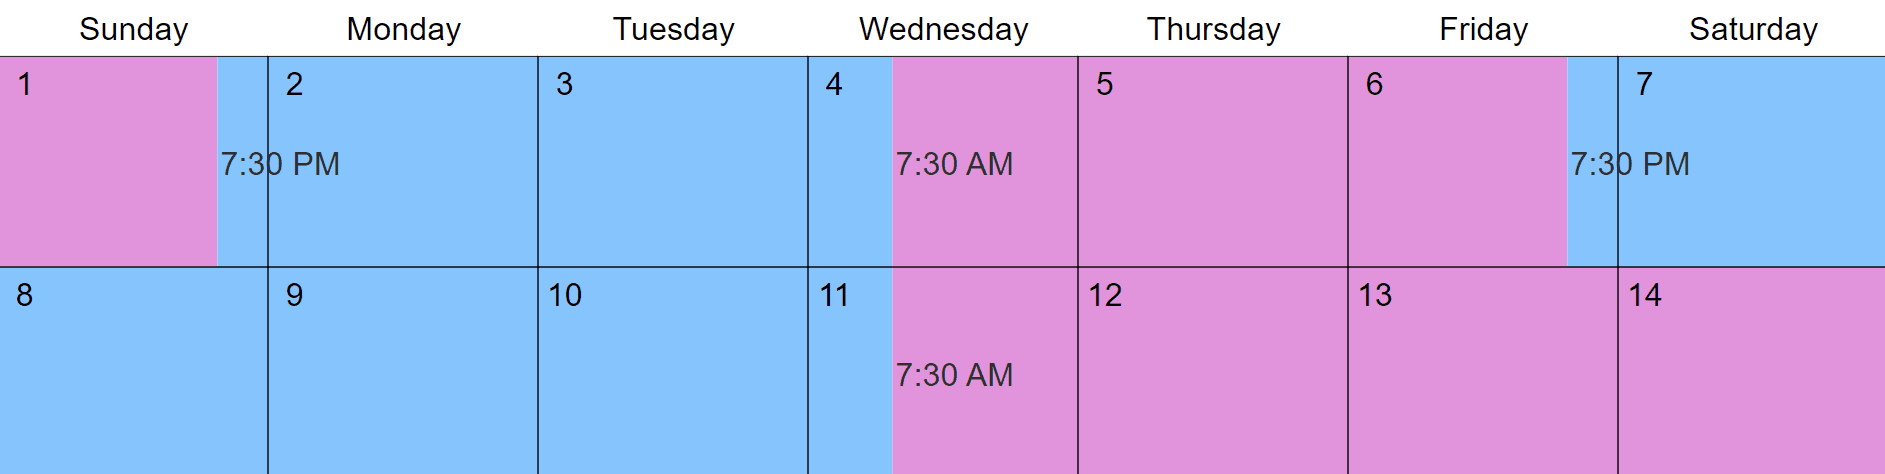 What is a 2-2-3 work schedule and how to implement it? - Time